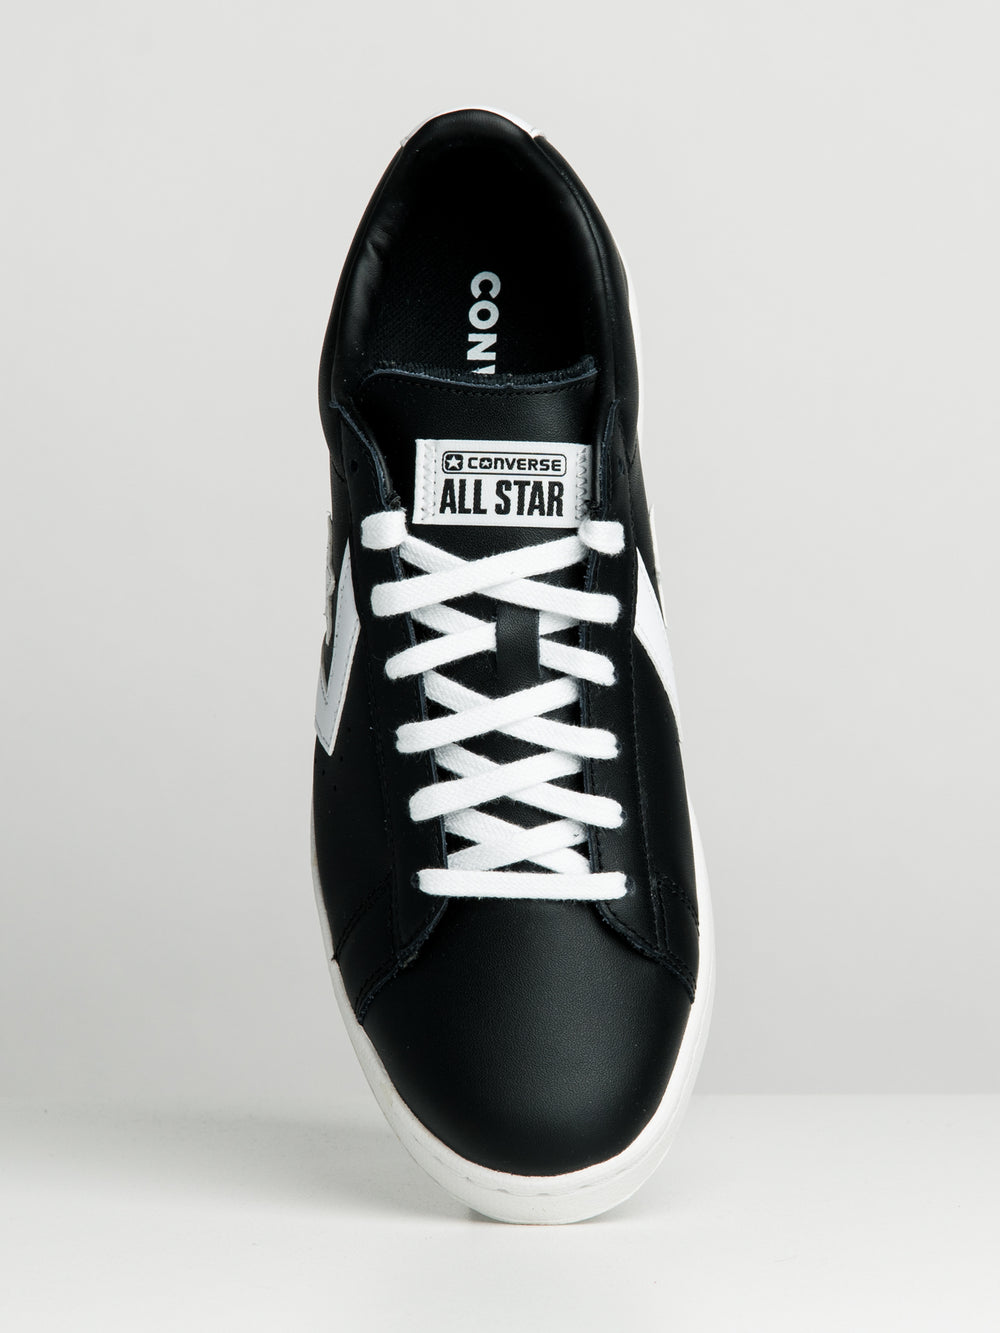 MENS CONVERSE PRO LEATHER SNEAKER - CLEARANCE